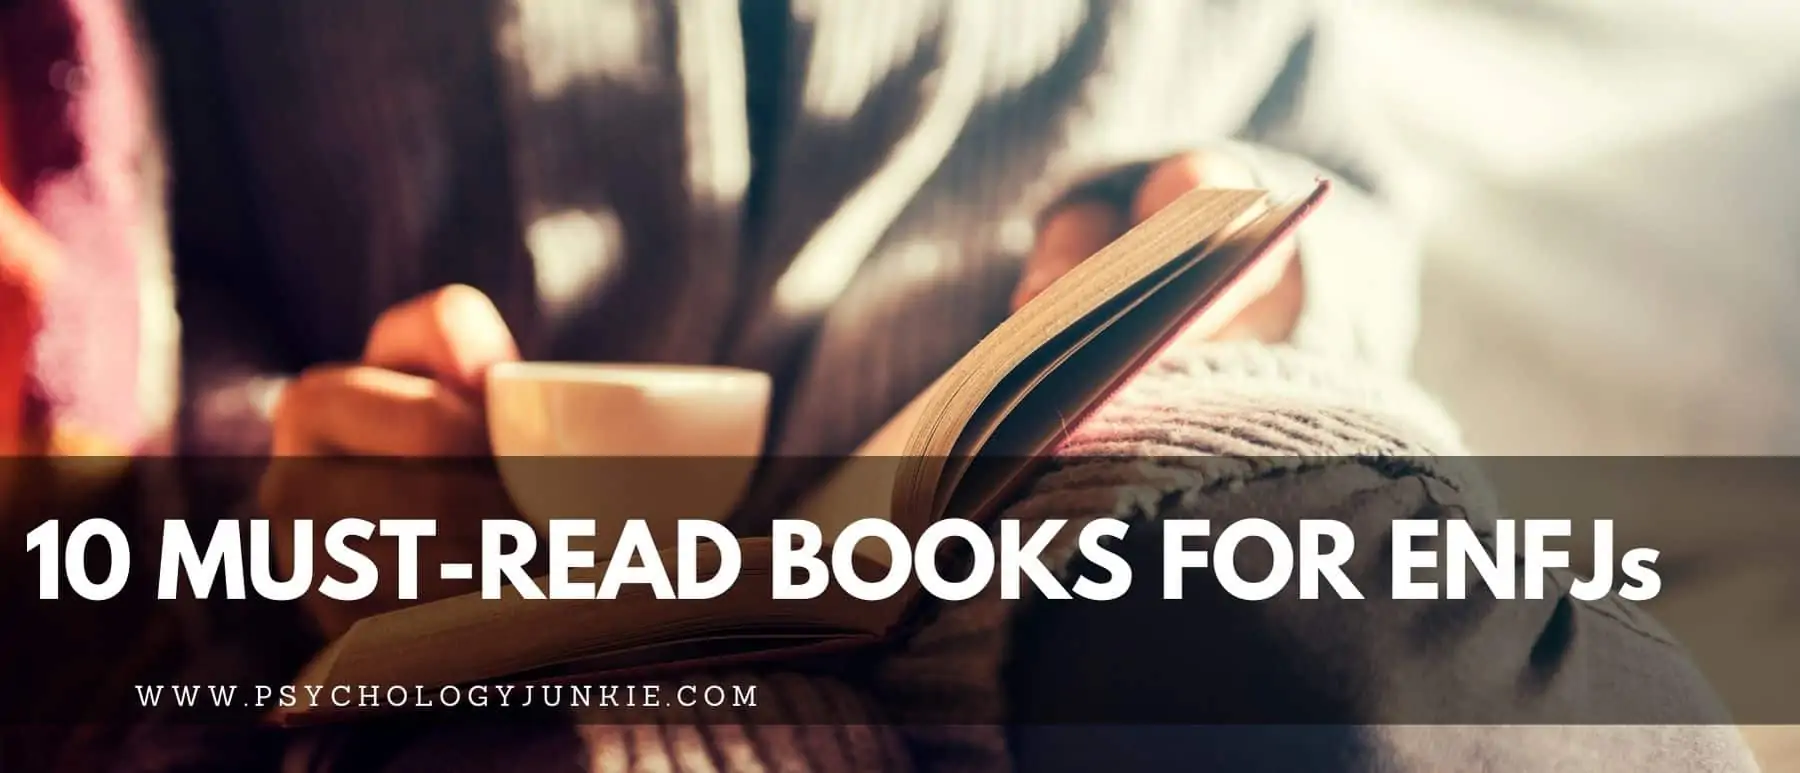 Discover 10 books that ENFJs mention as favorites again and again. #MBTI #Personality #ENFJ